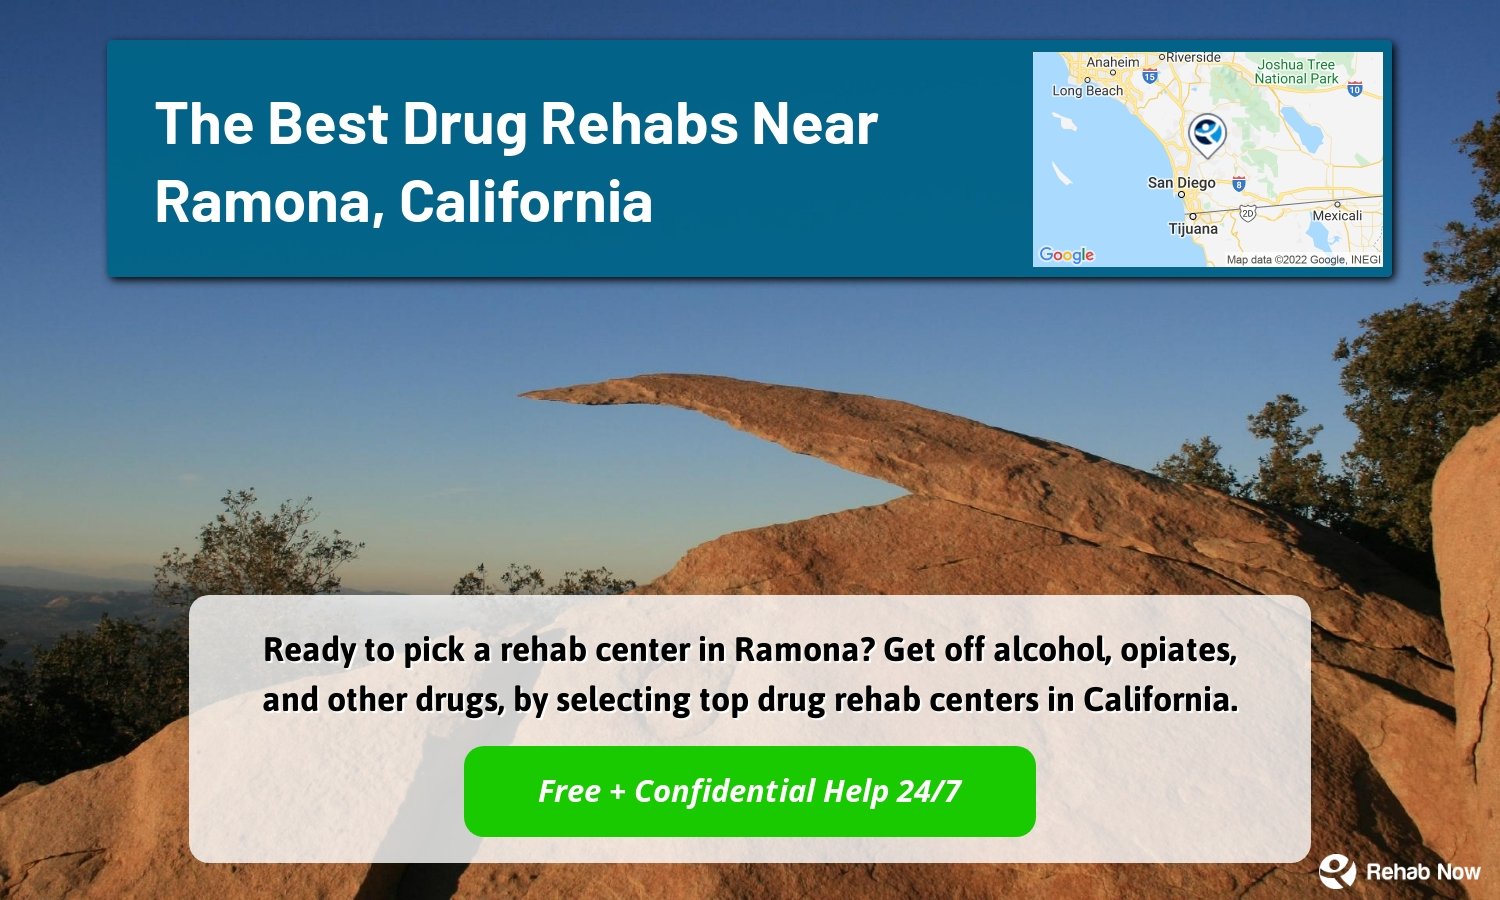 Ready to pick a rehab center in Ramona? Get off alcohol, opiates, and other drugs, by selecting top drug rehab centers in California.